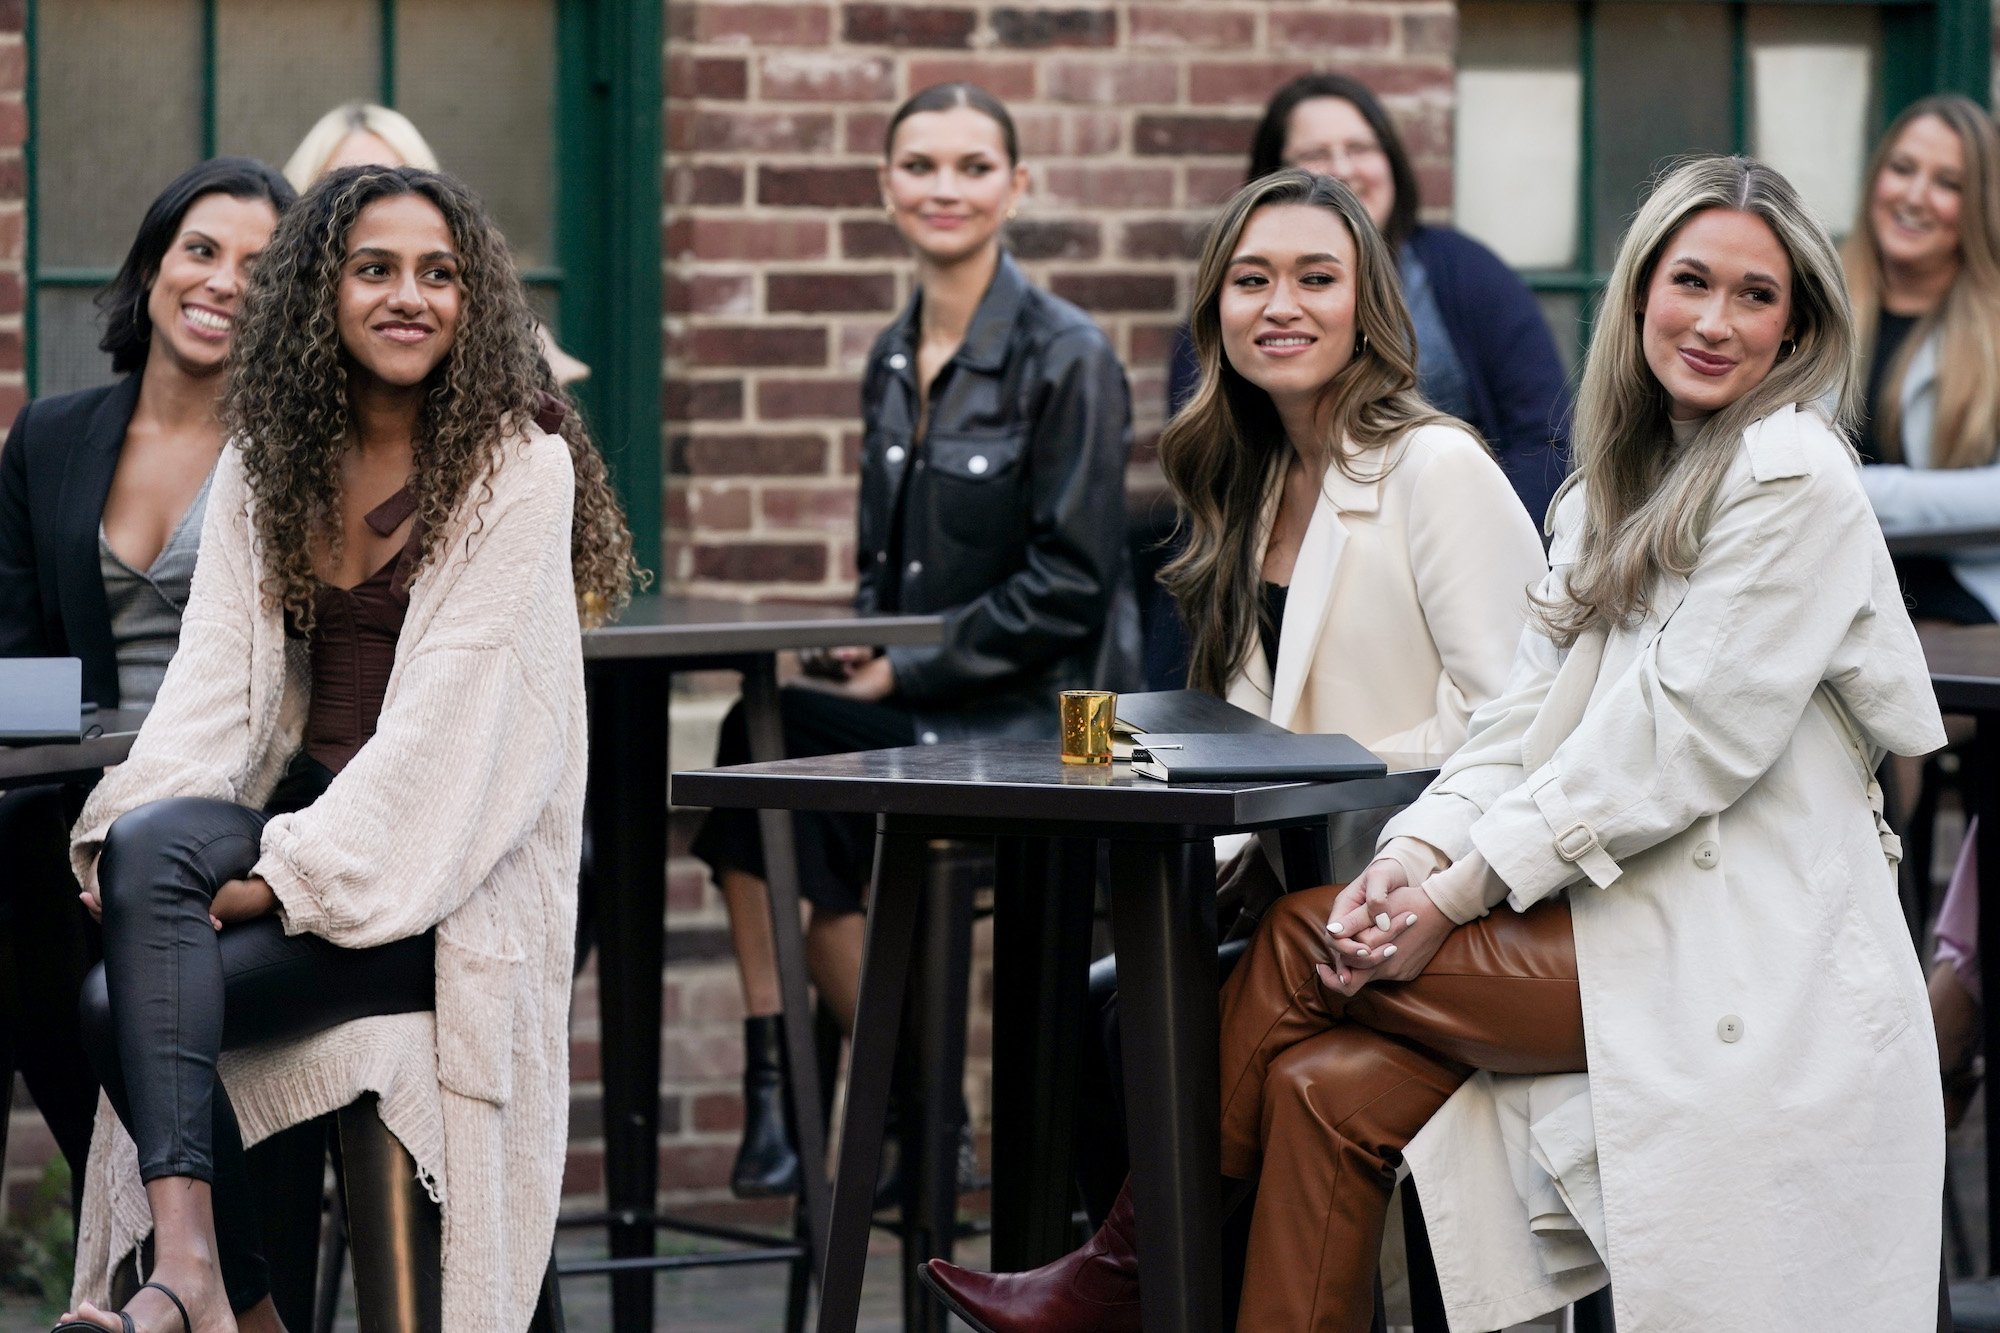 The women of 'The Bachelor' Season 26 sit at tables outside in front of a brick wall.